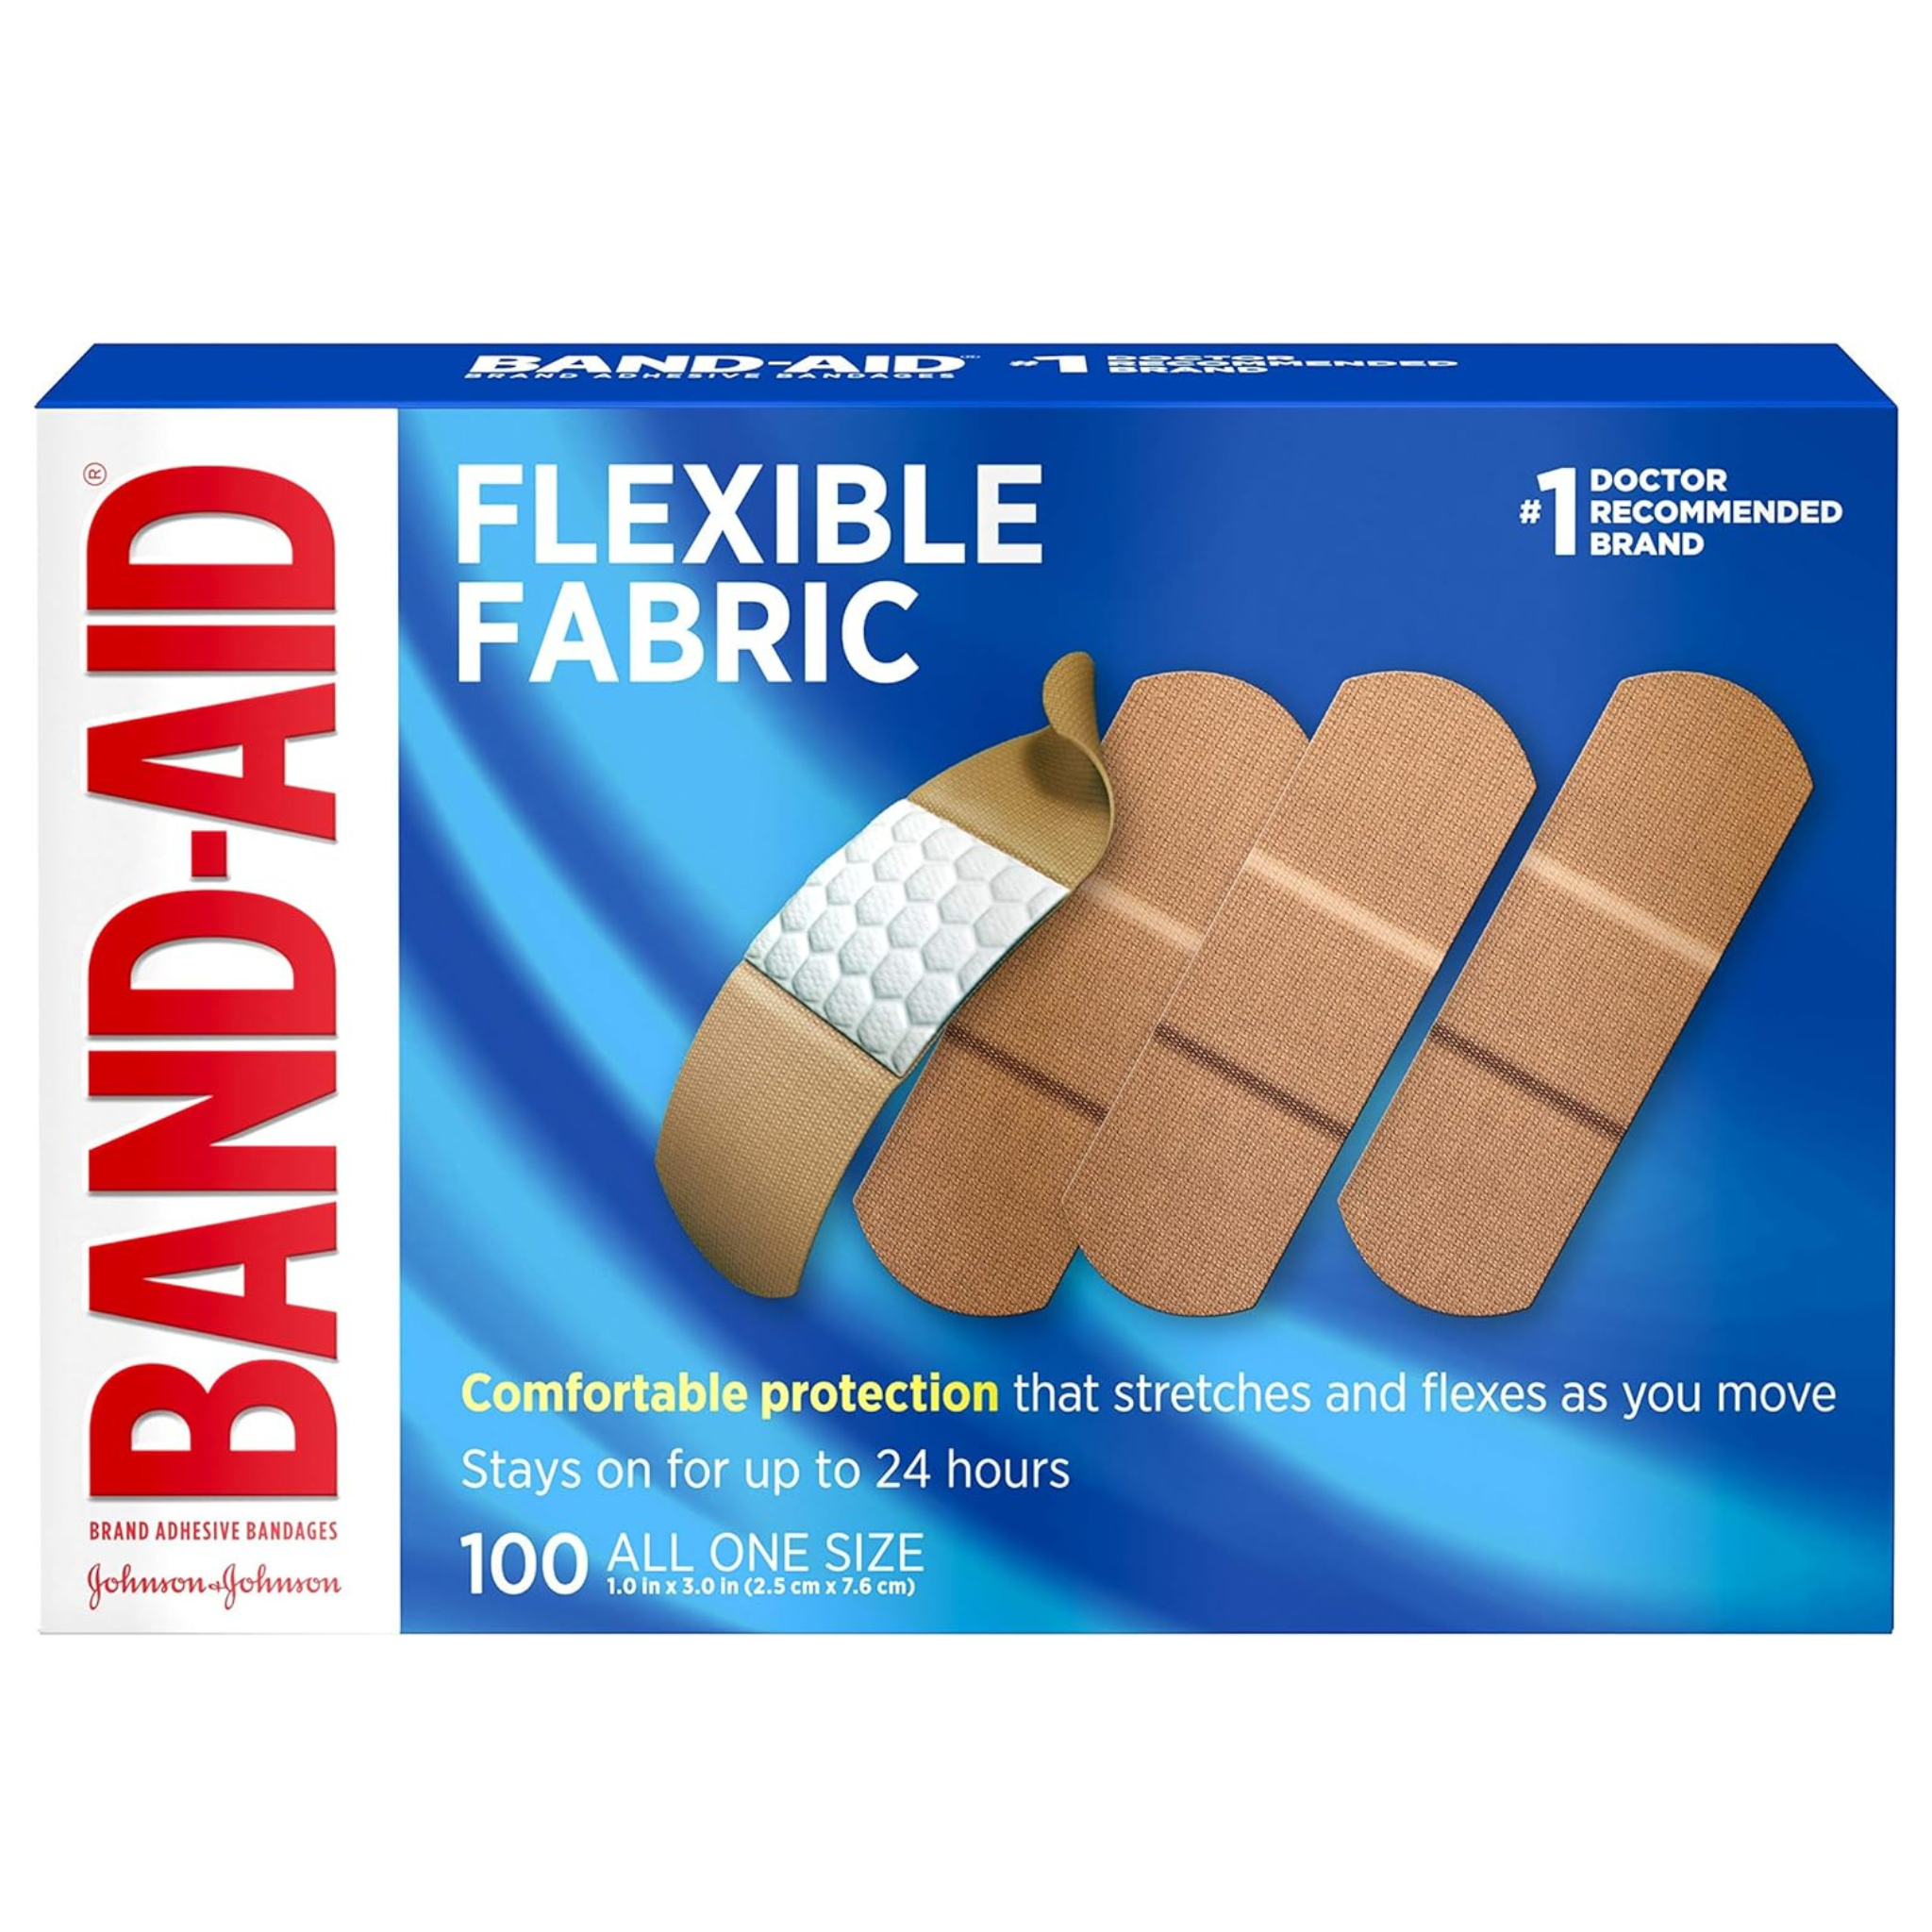 100-Count Band-Aid Brand Flexible Fabric Adhesive Bandages